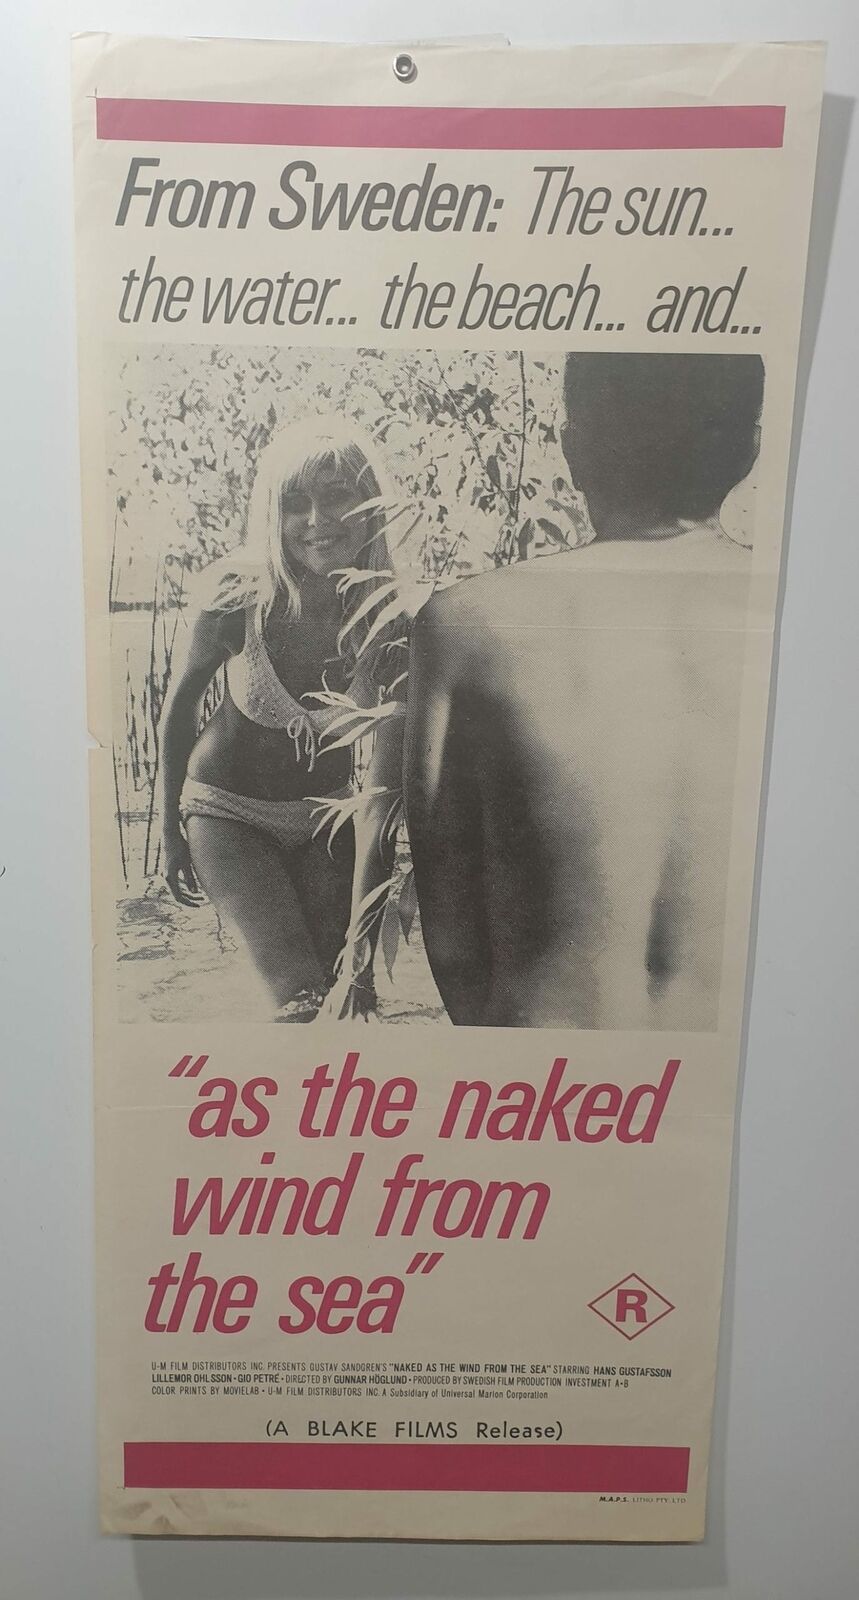 ORIGINAL DAYBILL MOVIE POSTER - AS THE NAKED WIND FROM SEA - ADULT